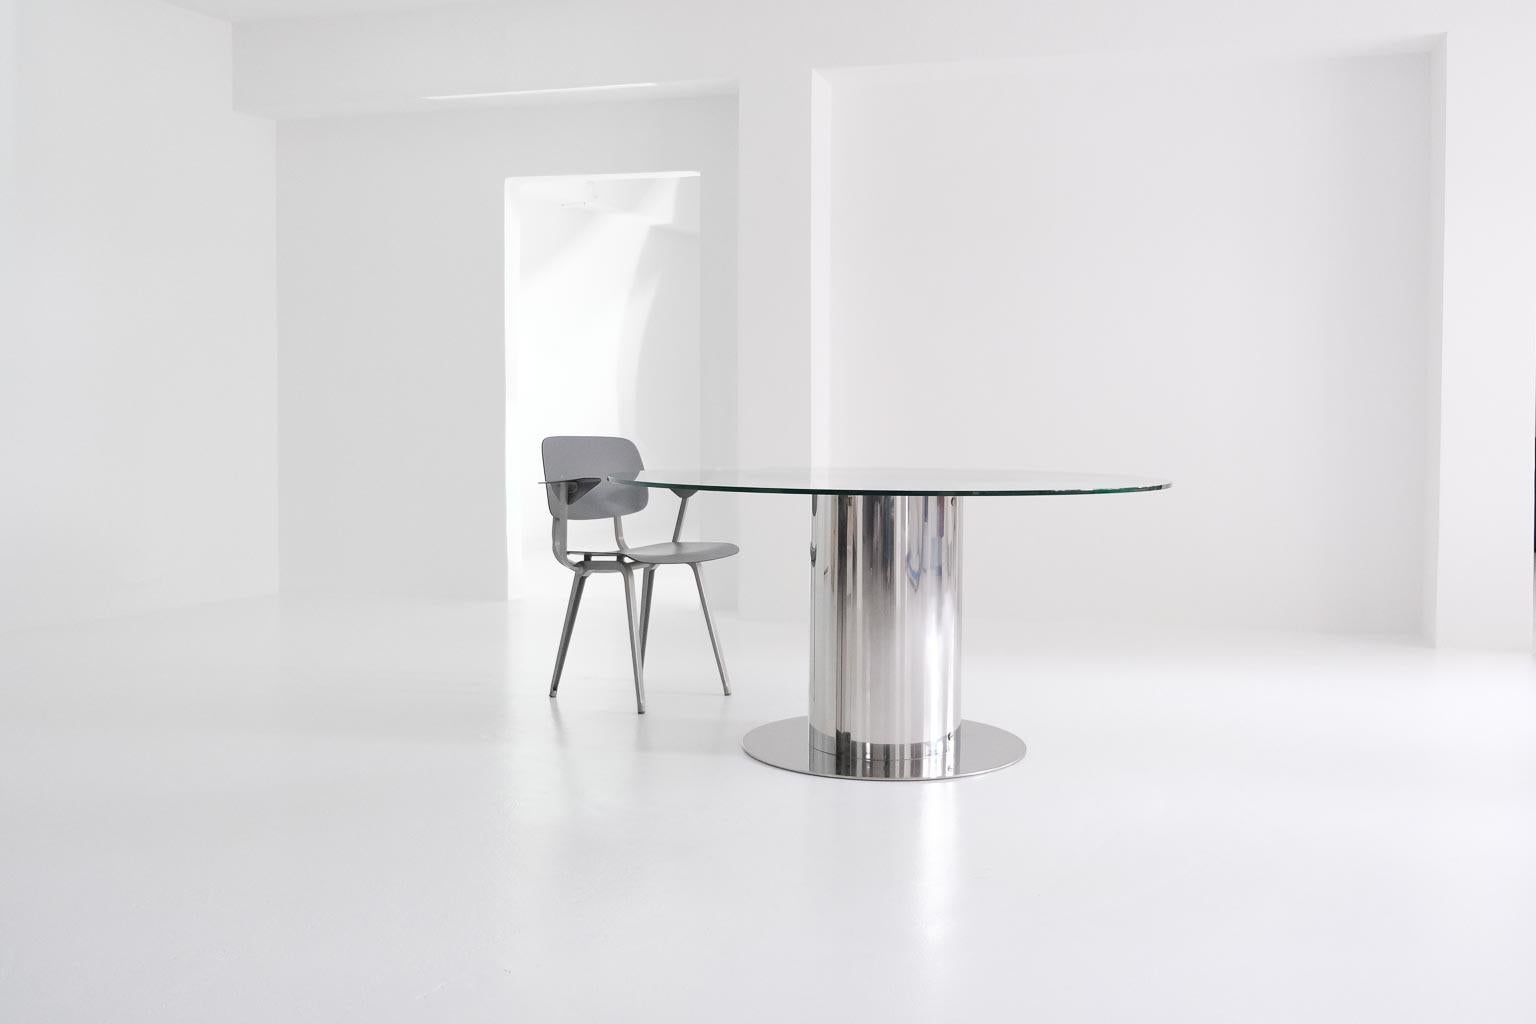 this cool and elegant „cidonio“ dining table was designed by driade co-founder antonia astori for cidue italy in 1968.

the round crystal glass top is supported by an equally round base made of chrome-plated stainless steel.

the glass top shows